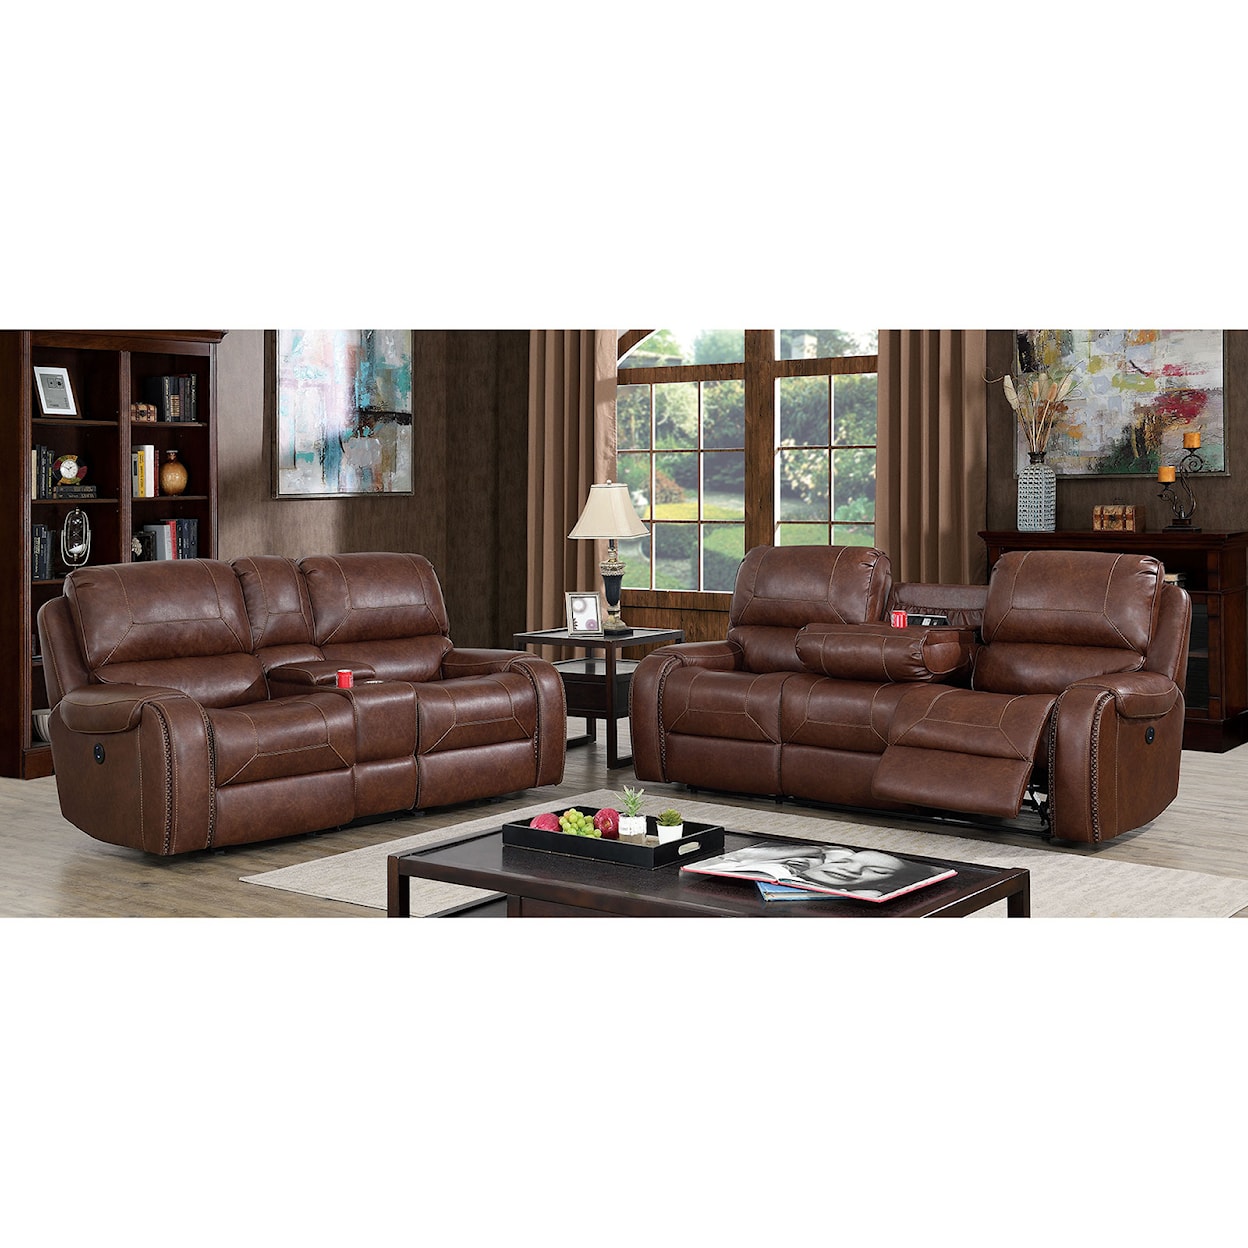 Furniture of America Walter Power Motion Sofa and Loveseat Set 